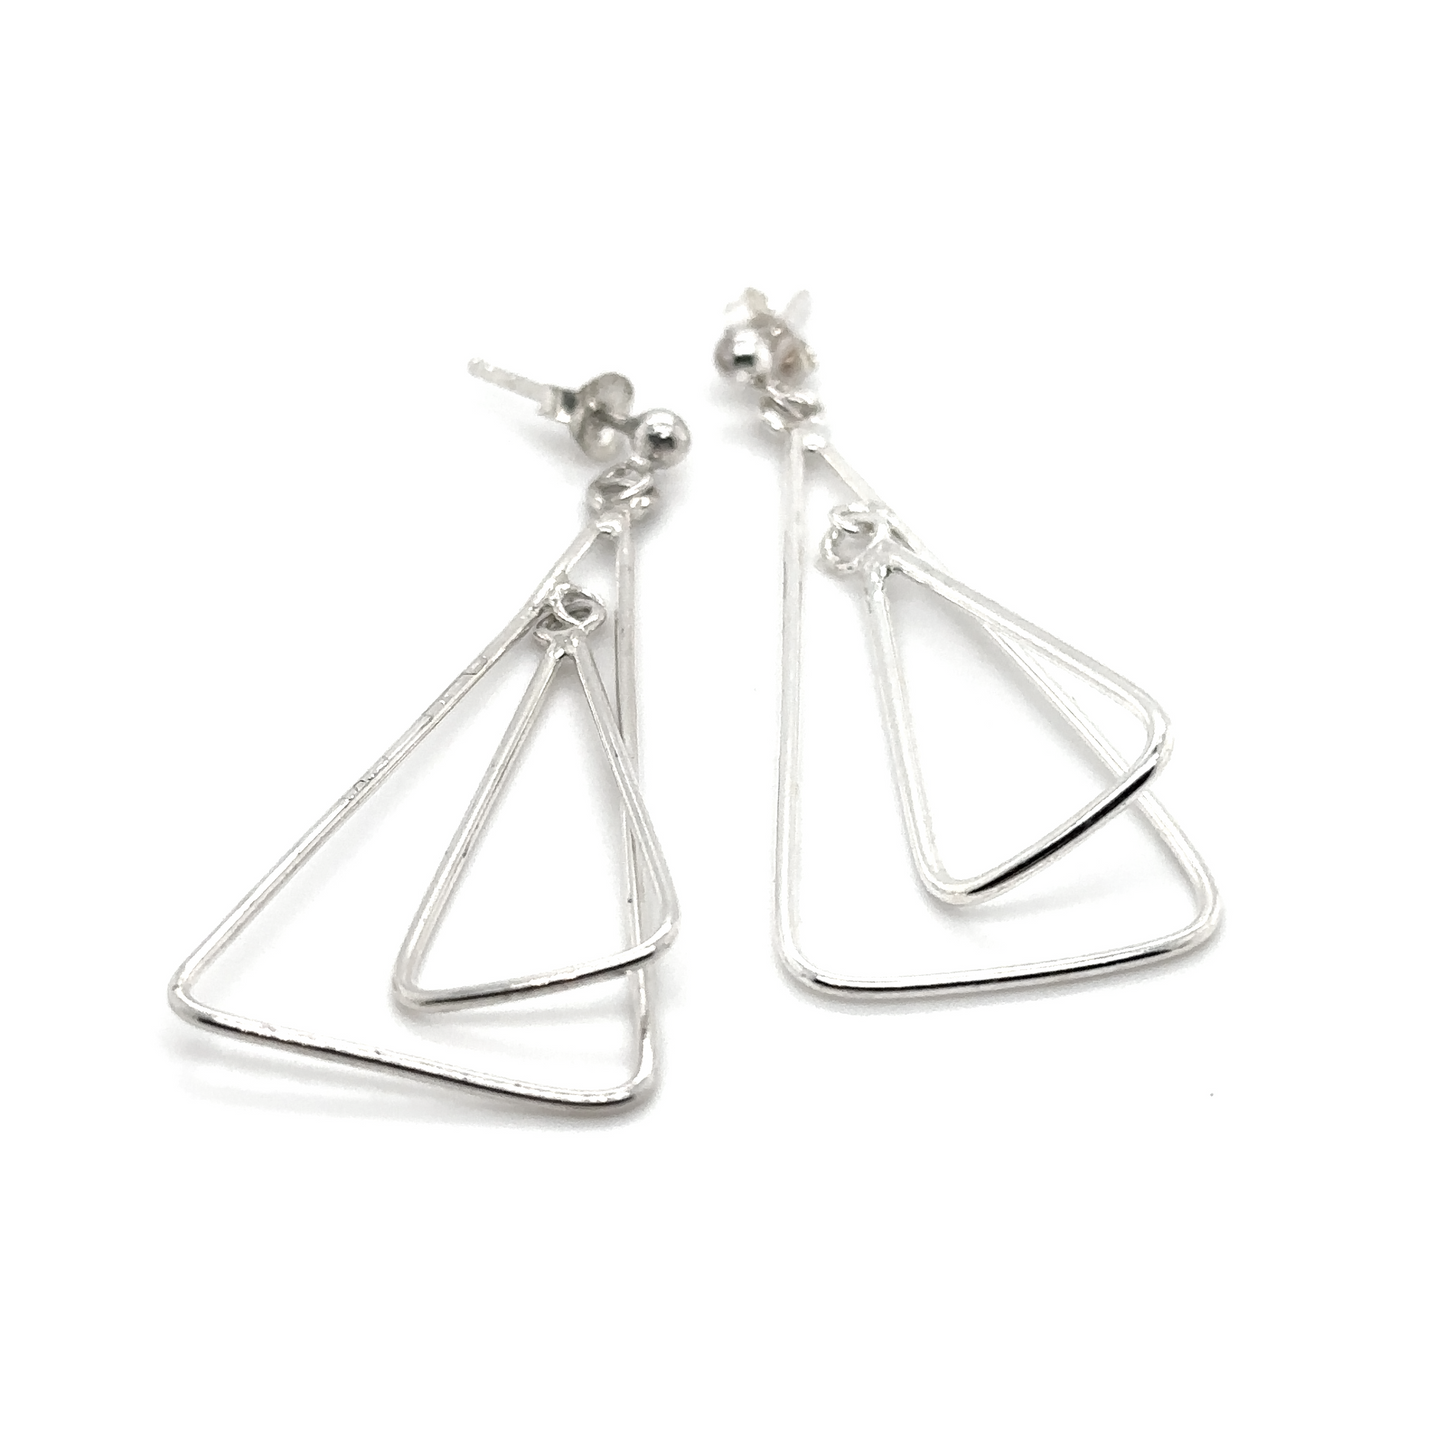 A pair of elegant Super Silver Simple Nesting Triangle Drop Post Earrings on a white background.